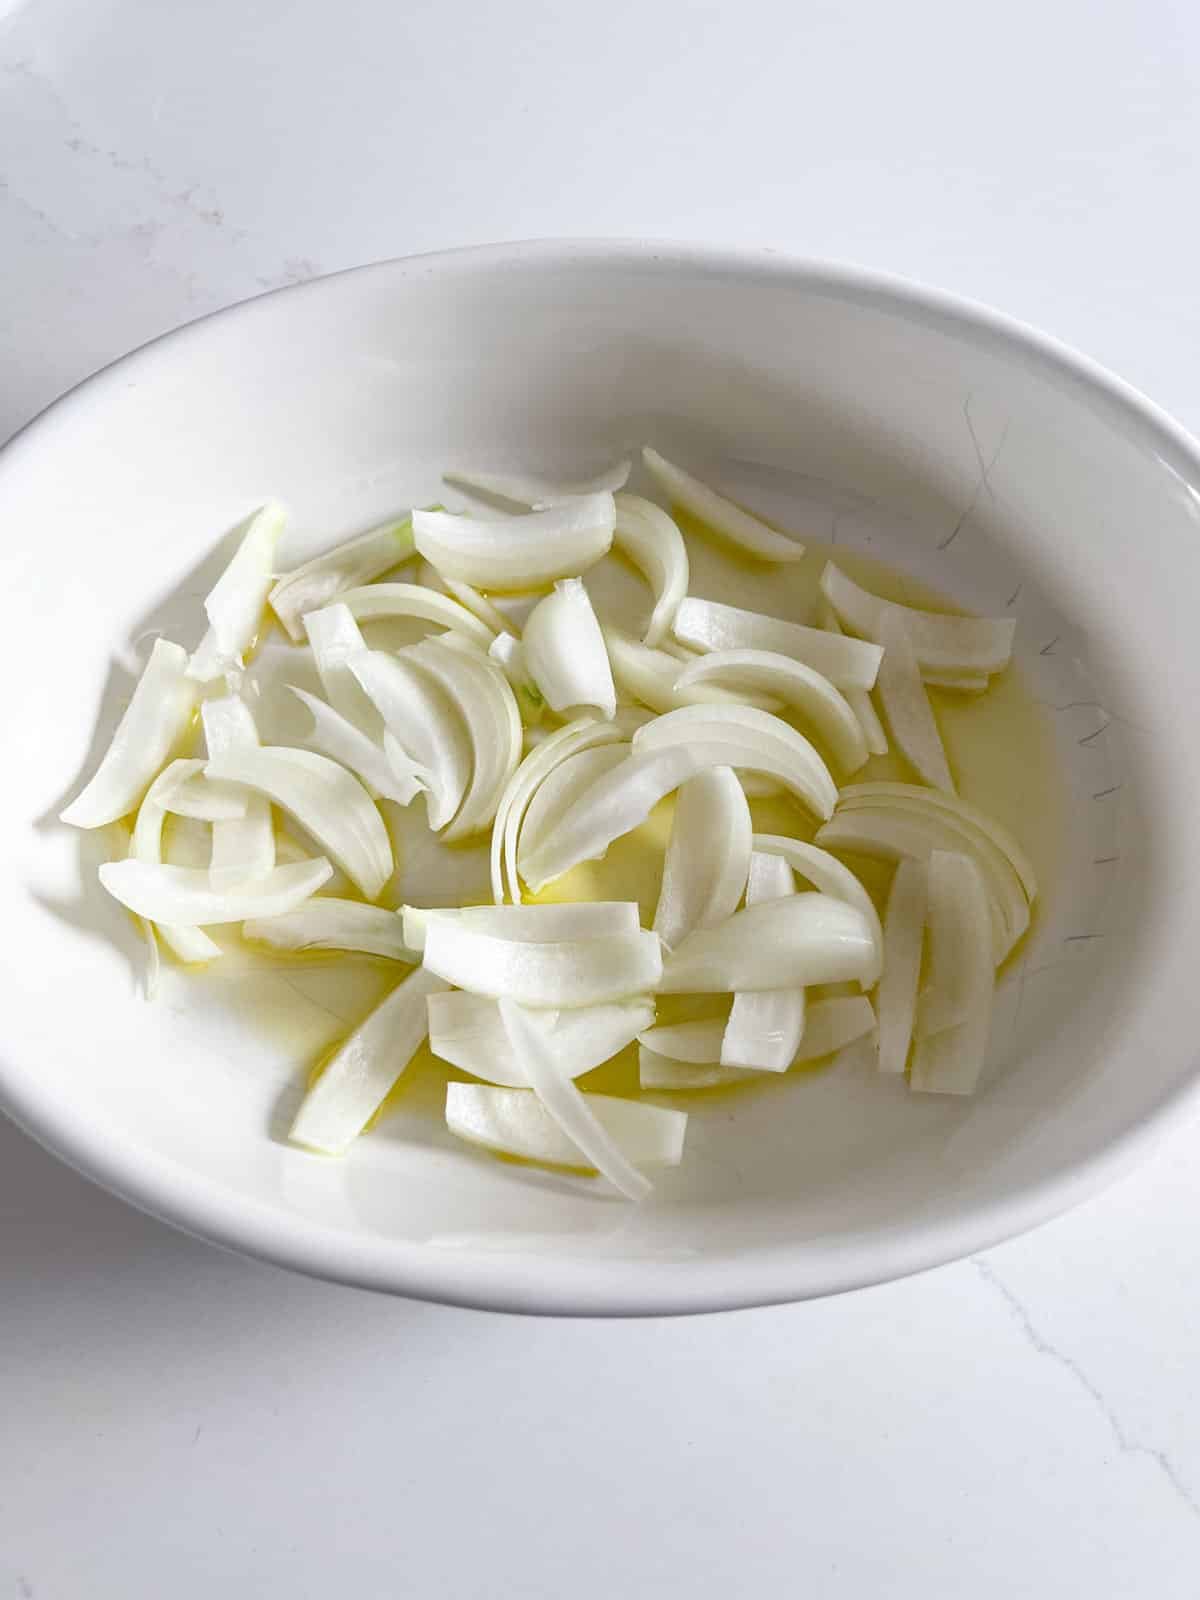 Sliced onions and oil in a white oval baking pan.